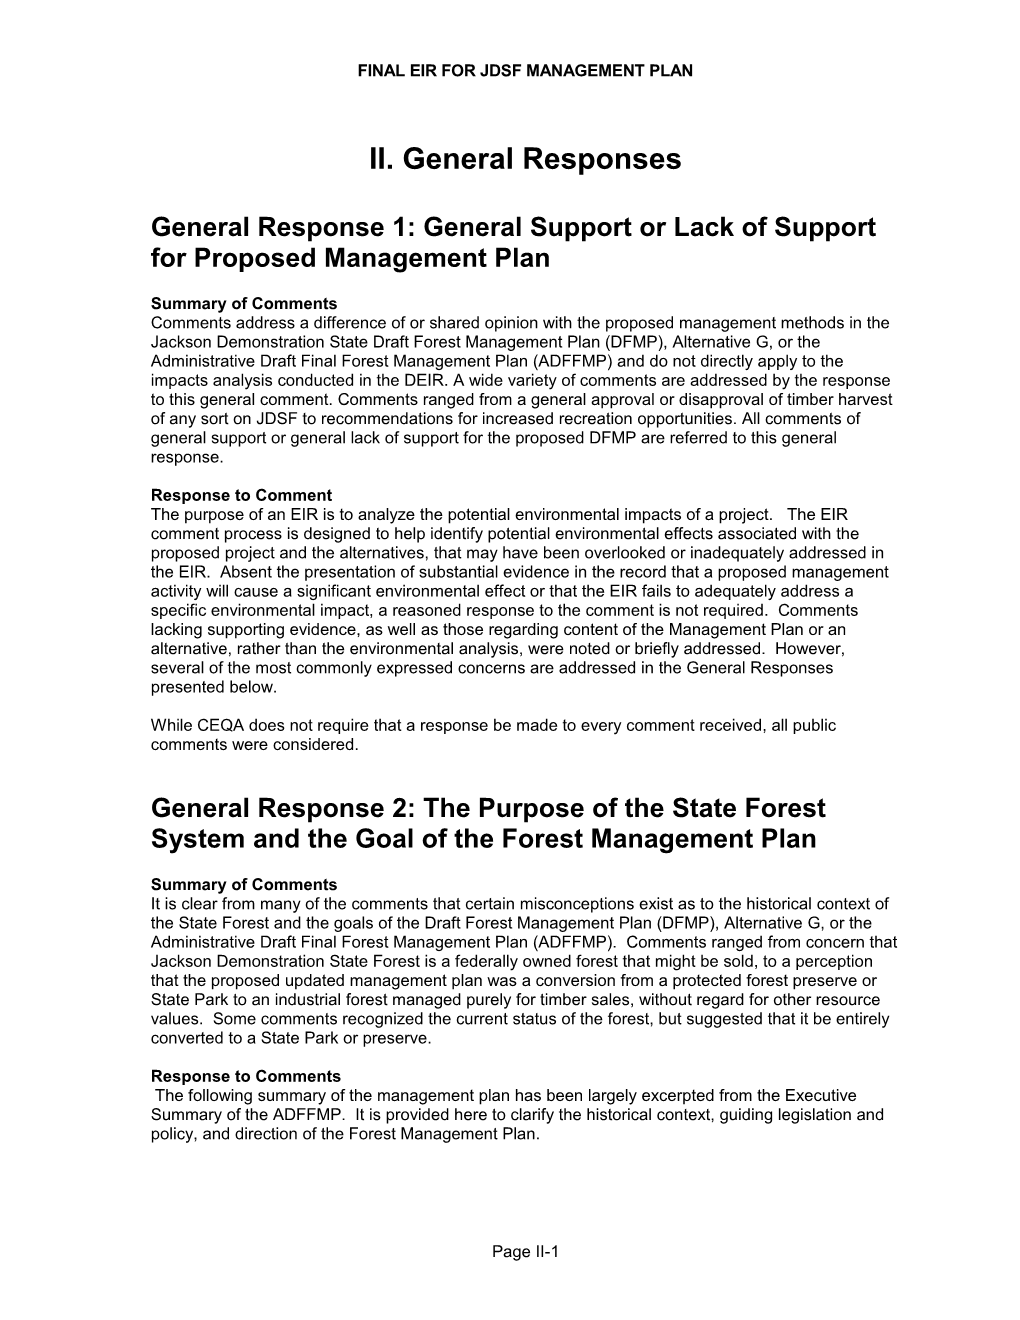 General Response 1: General Support Or Lack of Support for Proposed Management Plan